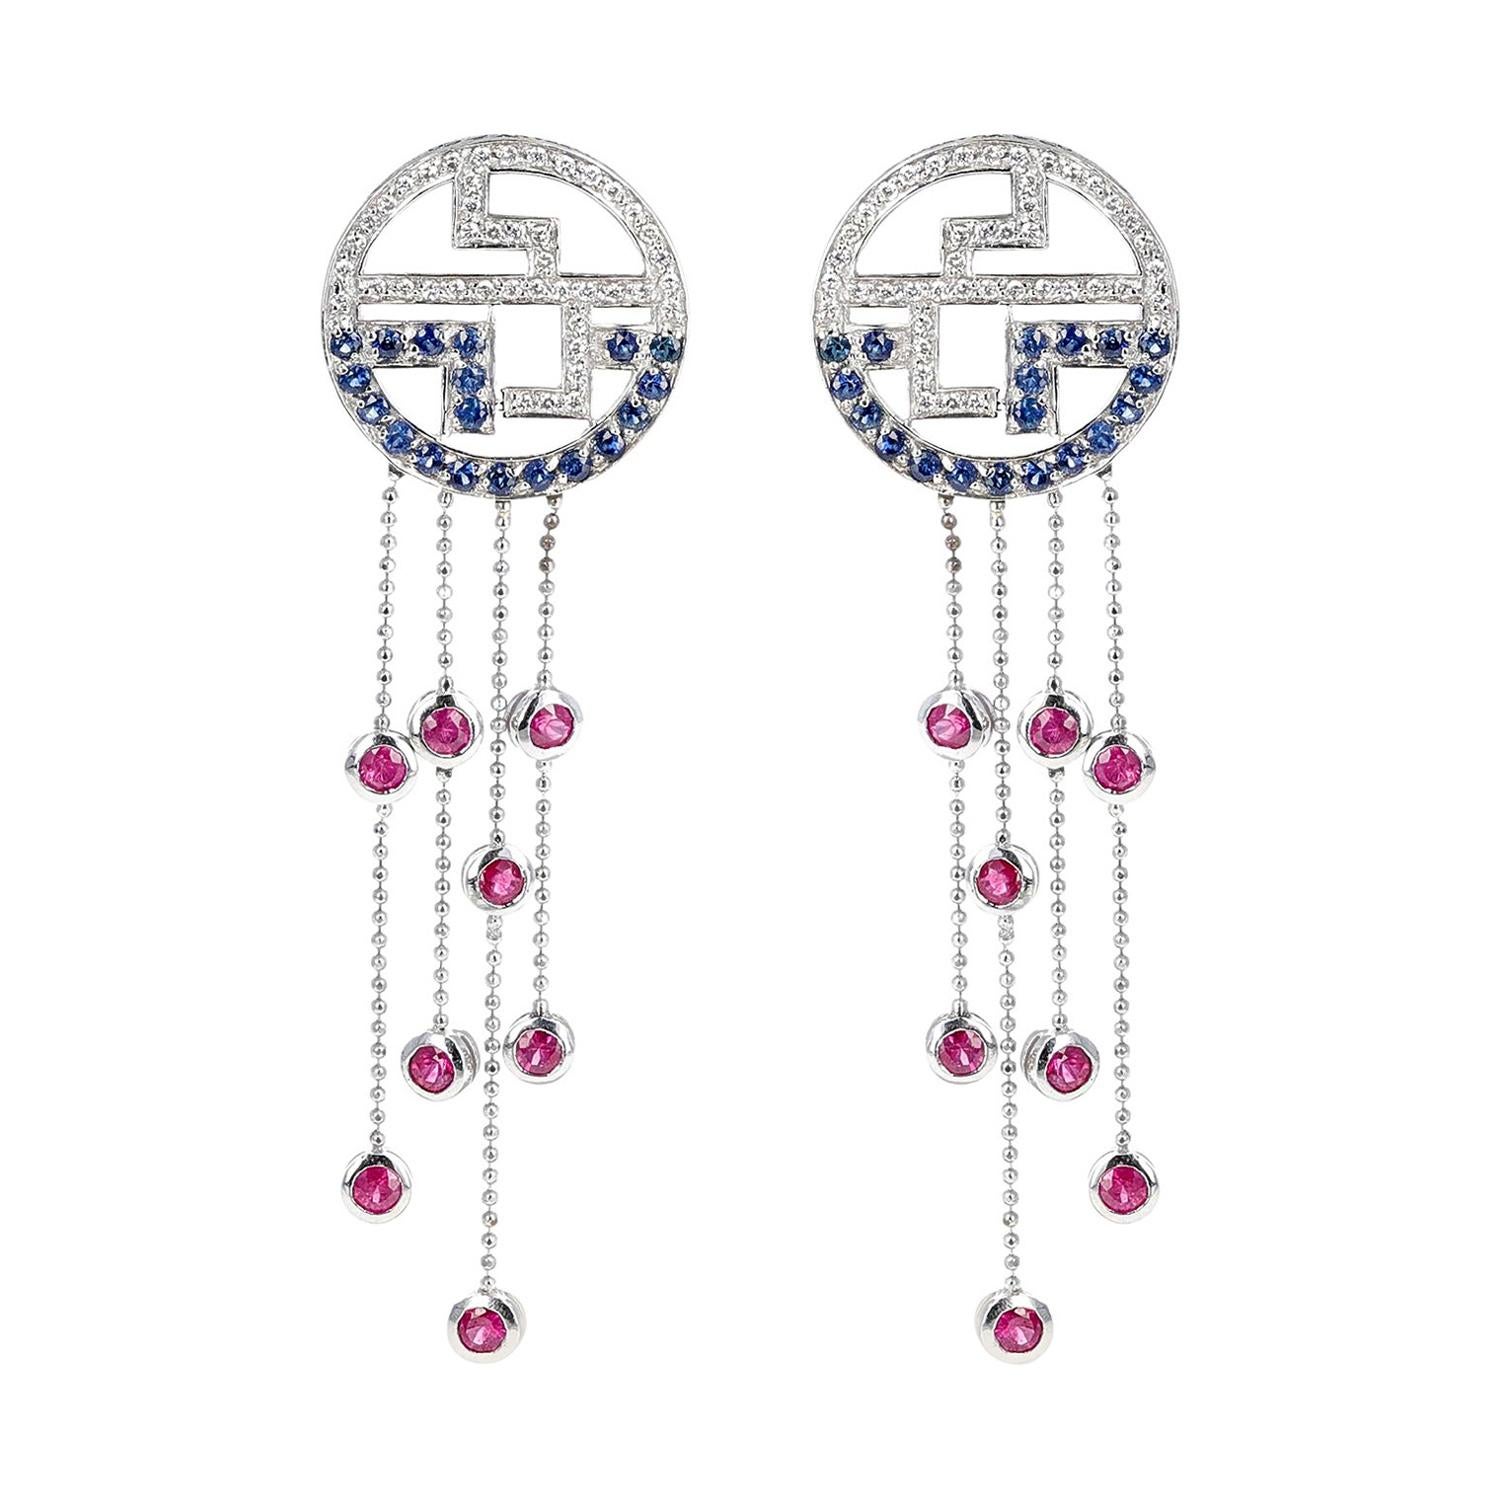 Tiffany & Co. Dangling Earrings with Ruby, Sapphire and Diamonds, 18 Karat Gold